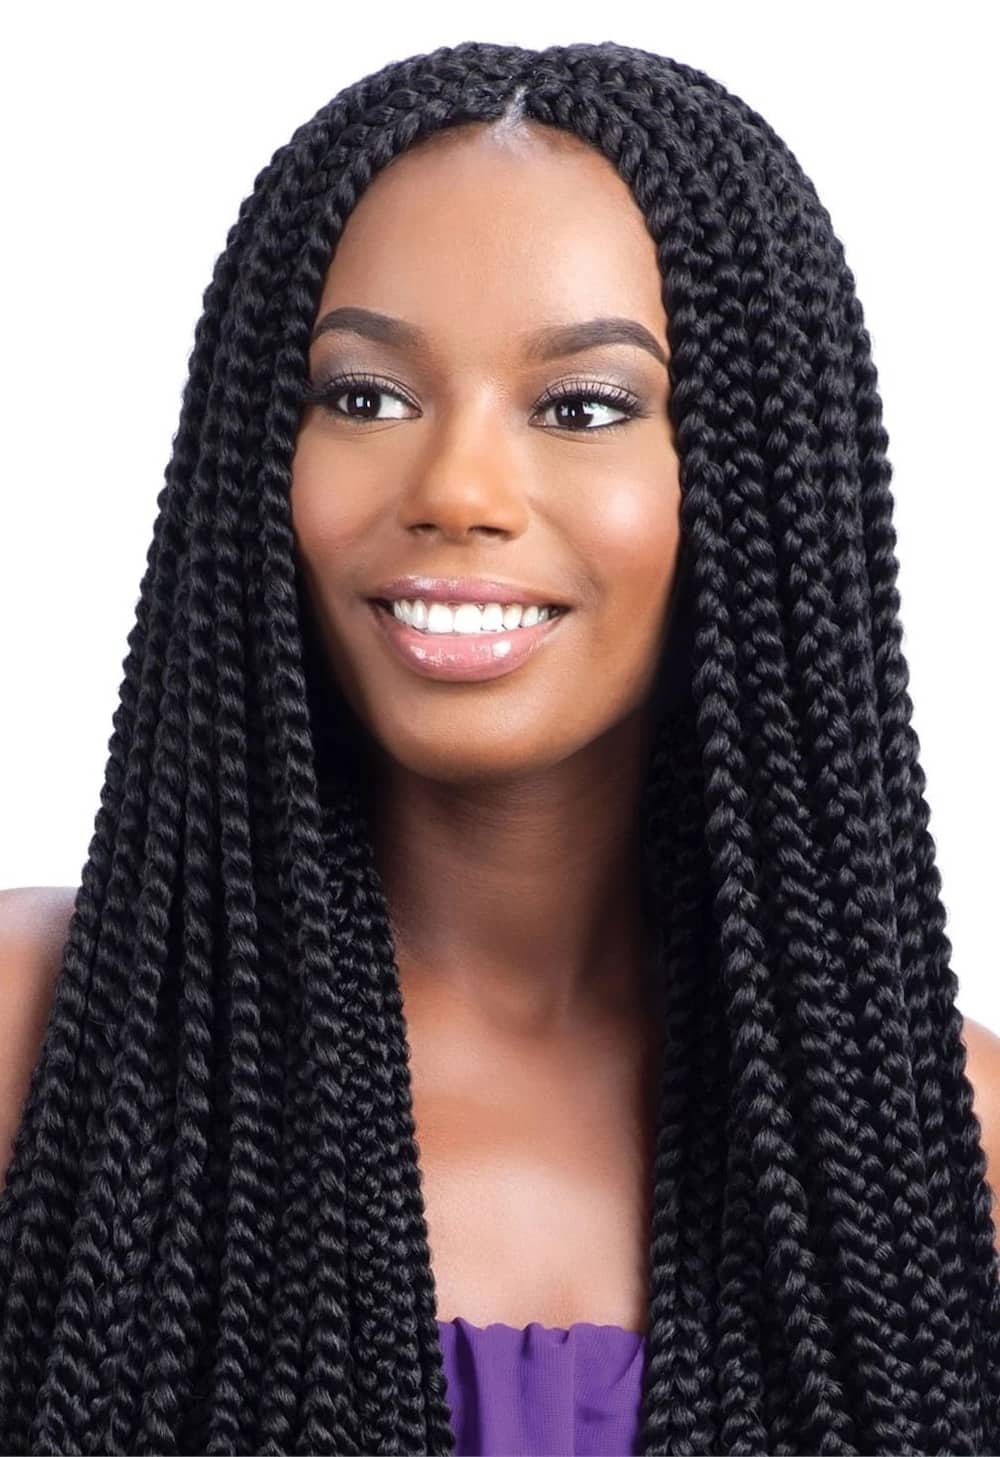 black braided hairstyles
african braided hairstyles
braided hairstyles for black girls
styles to do with box braids